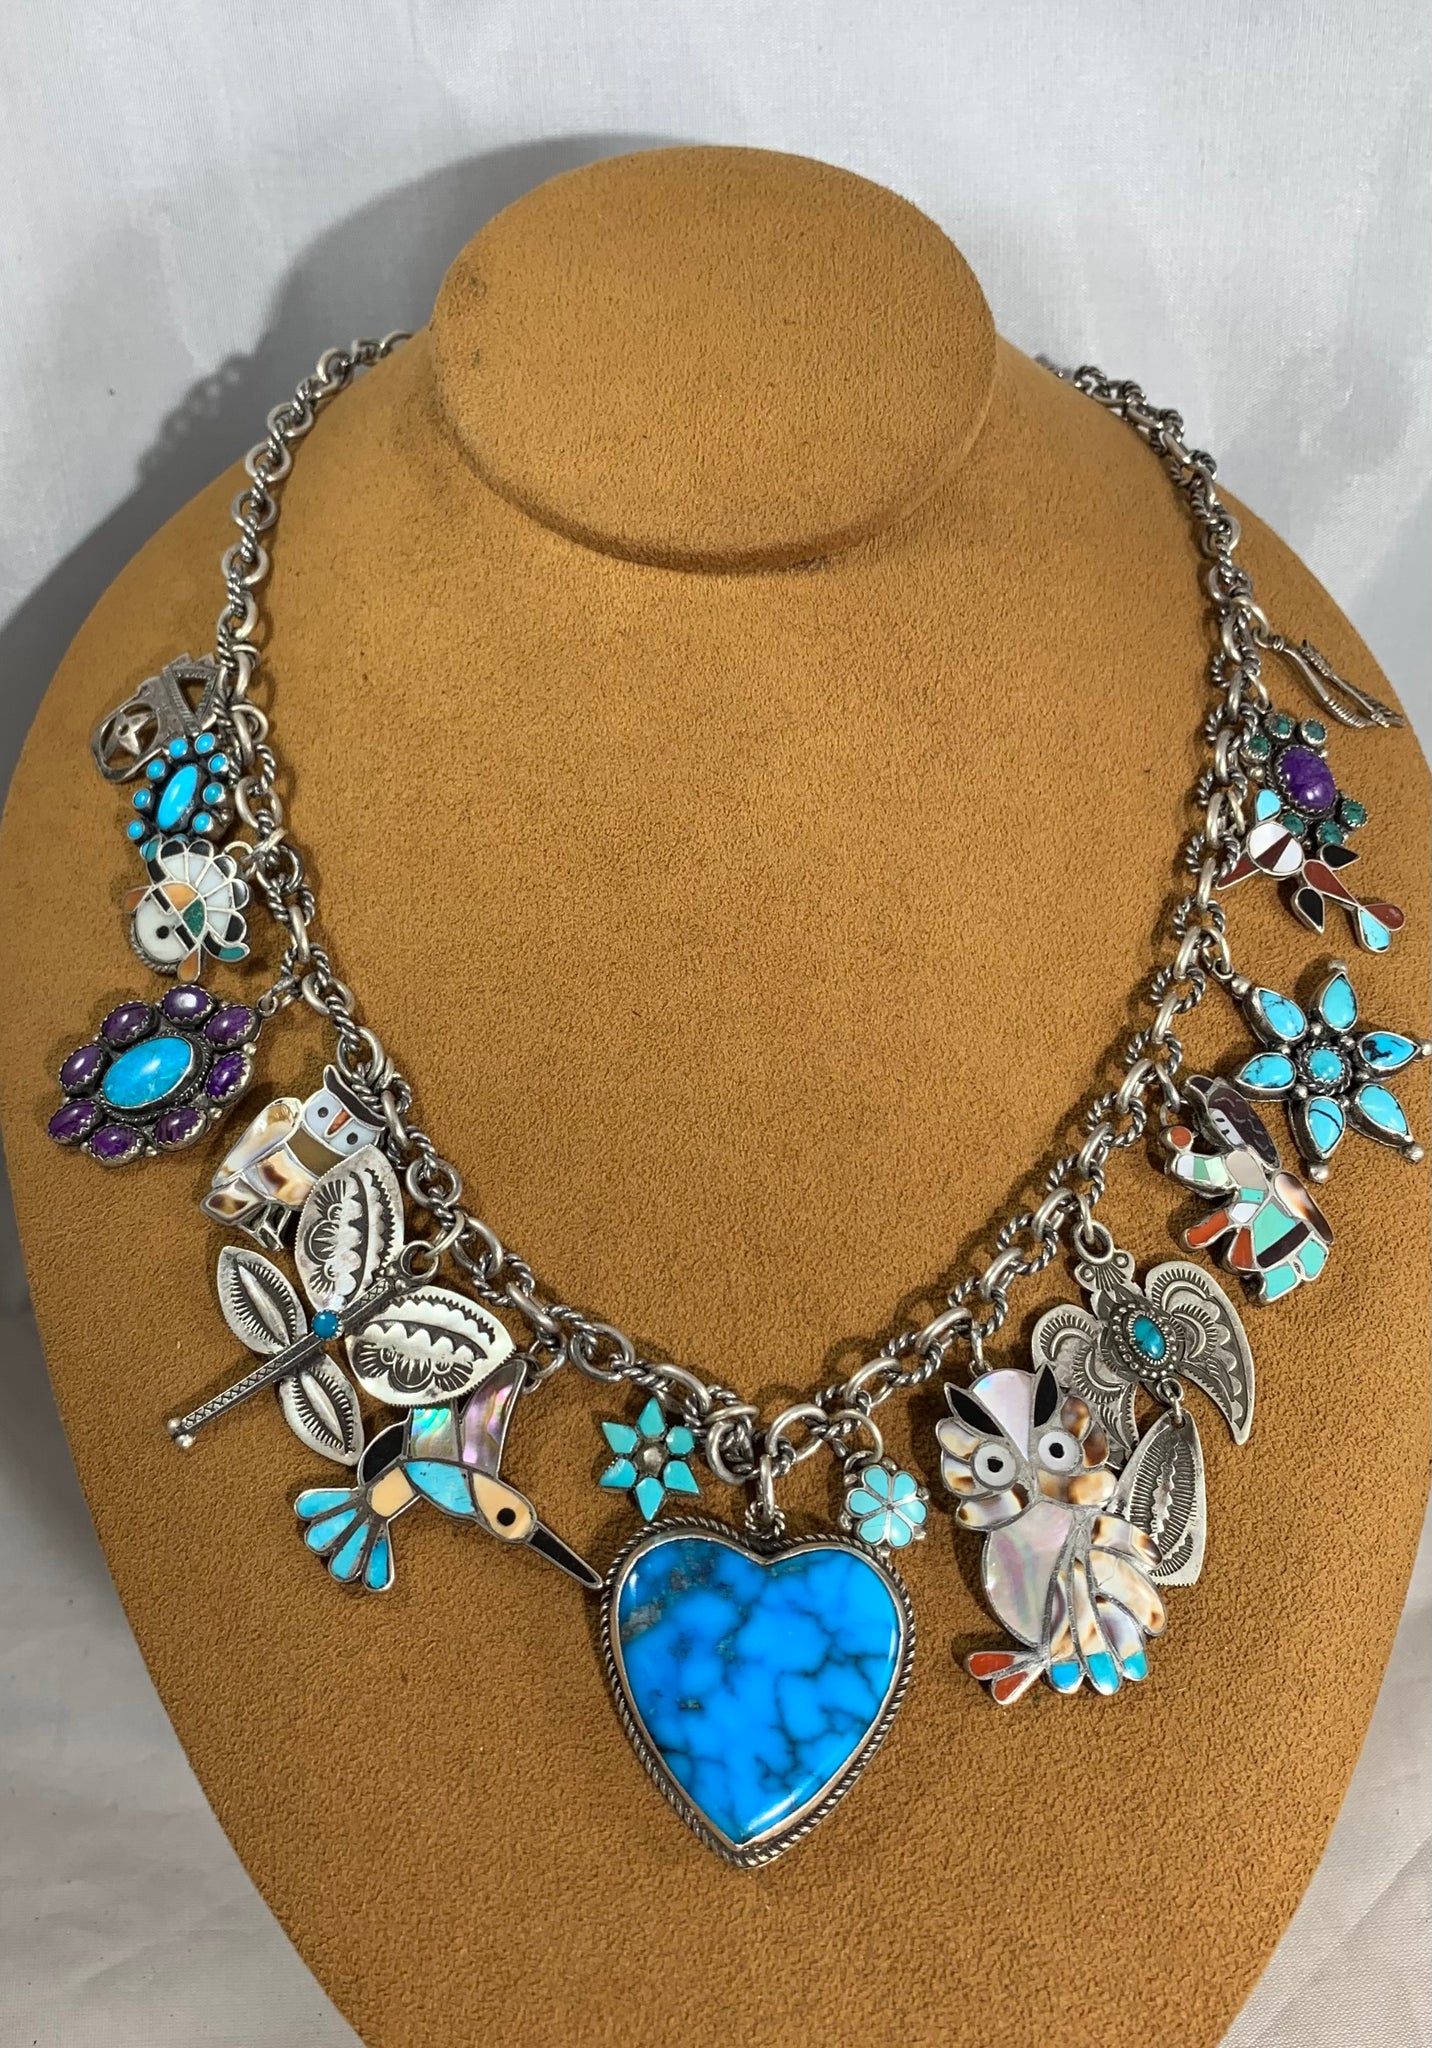 Vintage Charm Necklace by Valerie and Benny Aldrich